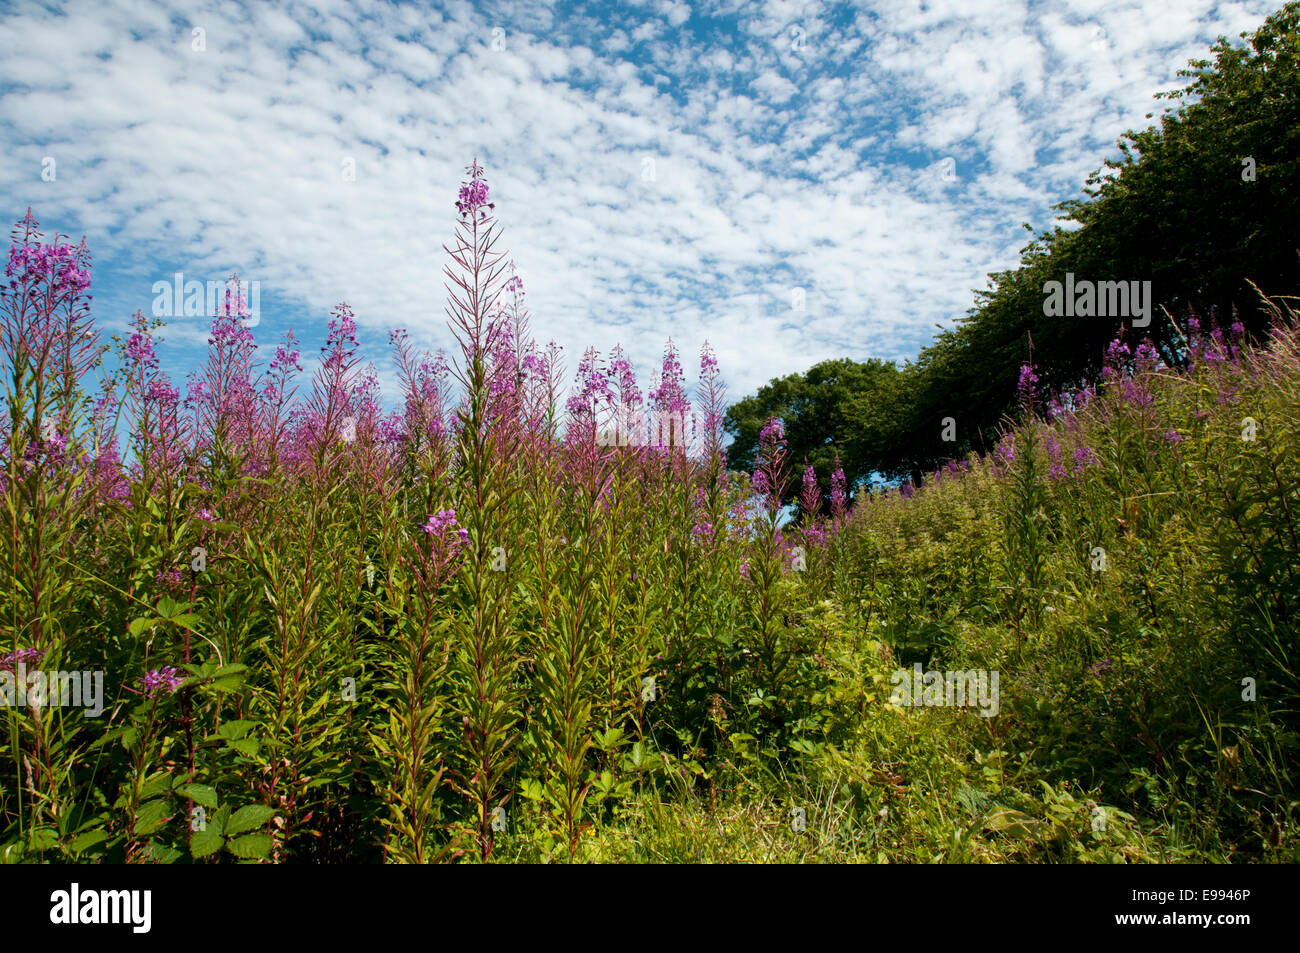 A stand of flowering Rosebay Willowherb on the South Downs near Eastbourne, East Sussex on a bright, sunny day Stock Photo